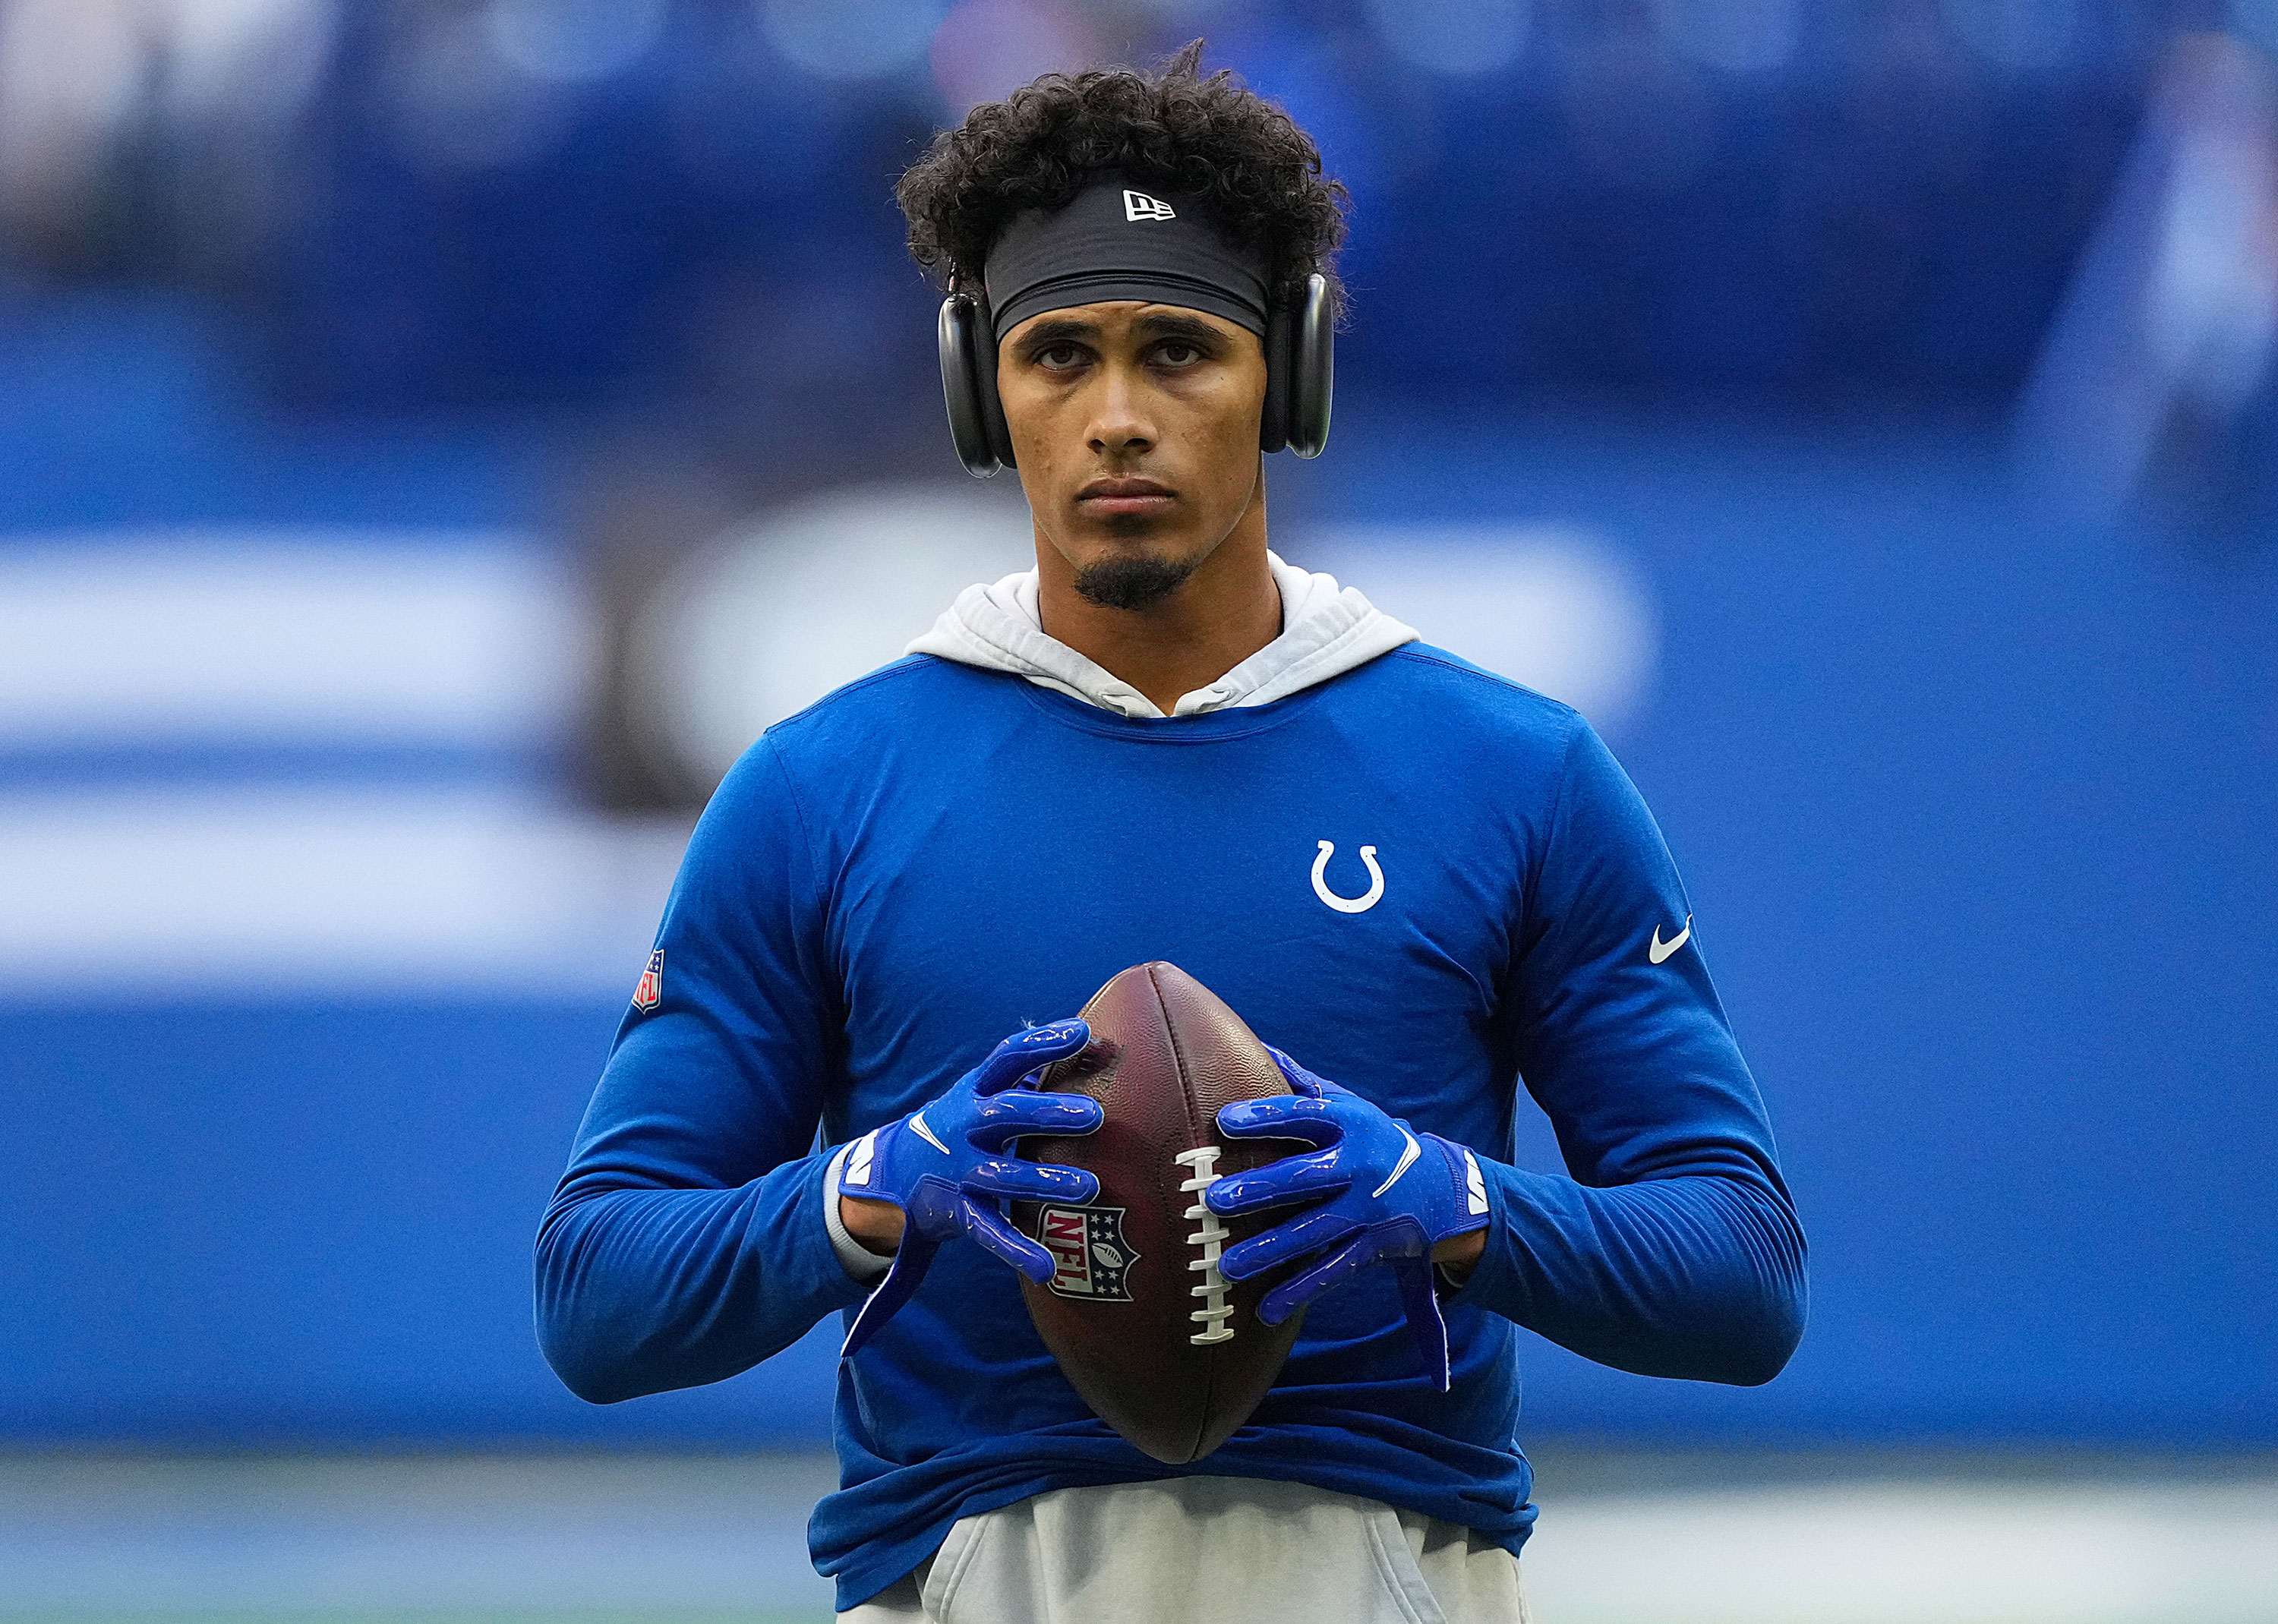 Indianapolis Colts safety Rodney Thomas II warms up before a game October 2. 